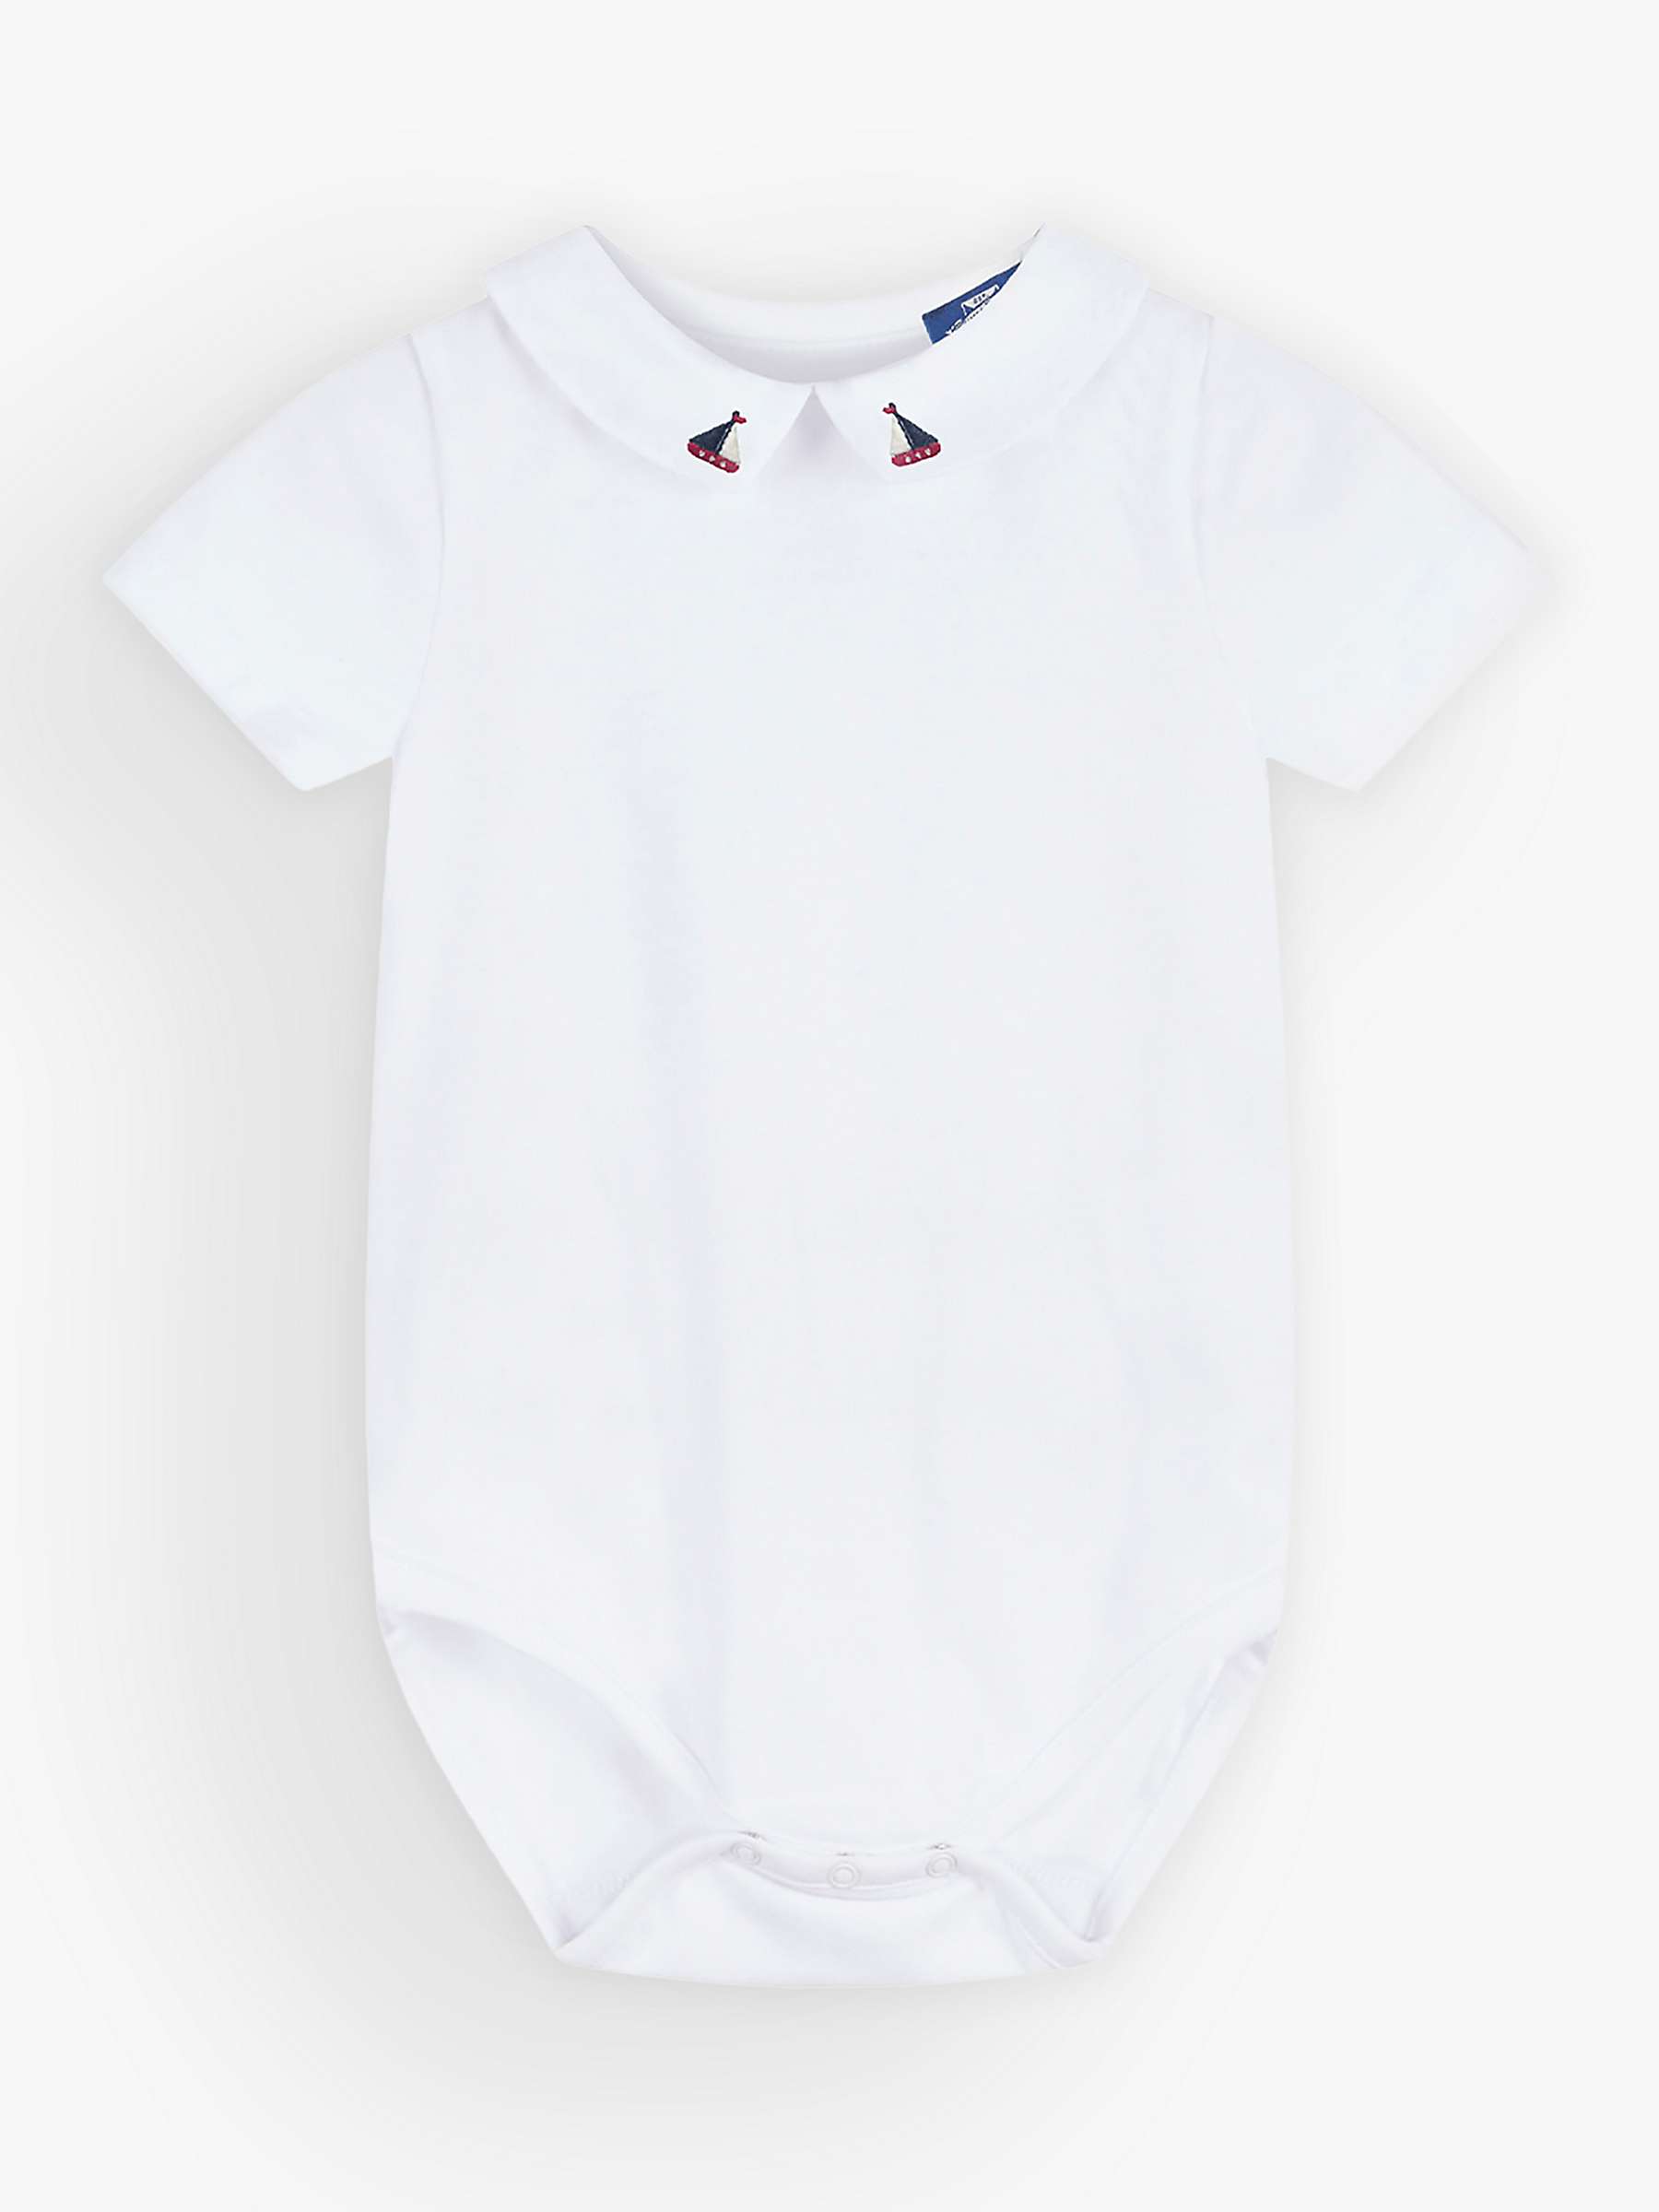 Buy Trotters Baby Monty Sailboat Embroidered Collar Bodysuit, White Online at johnlewis.com